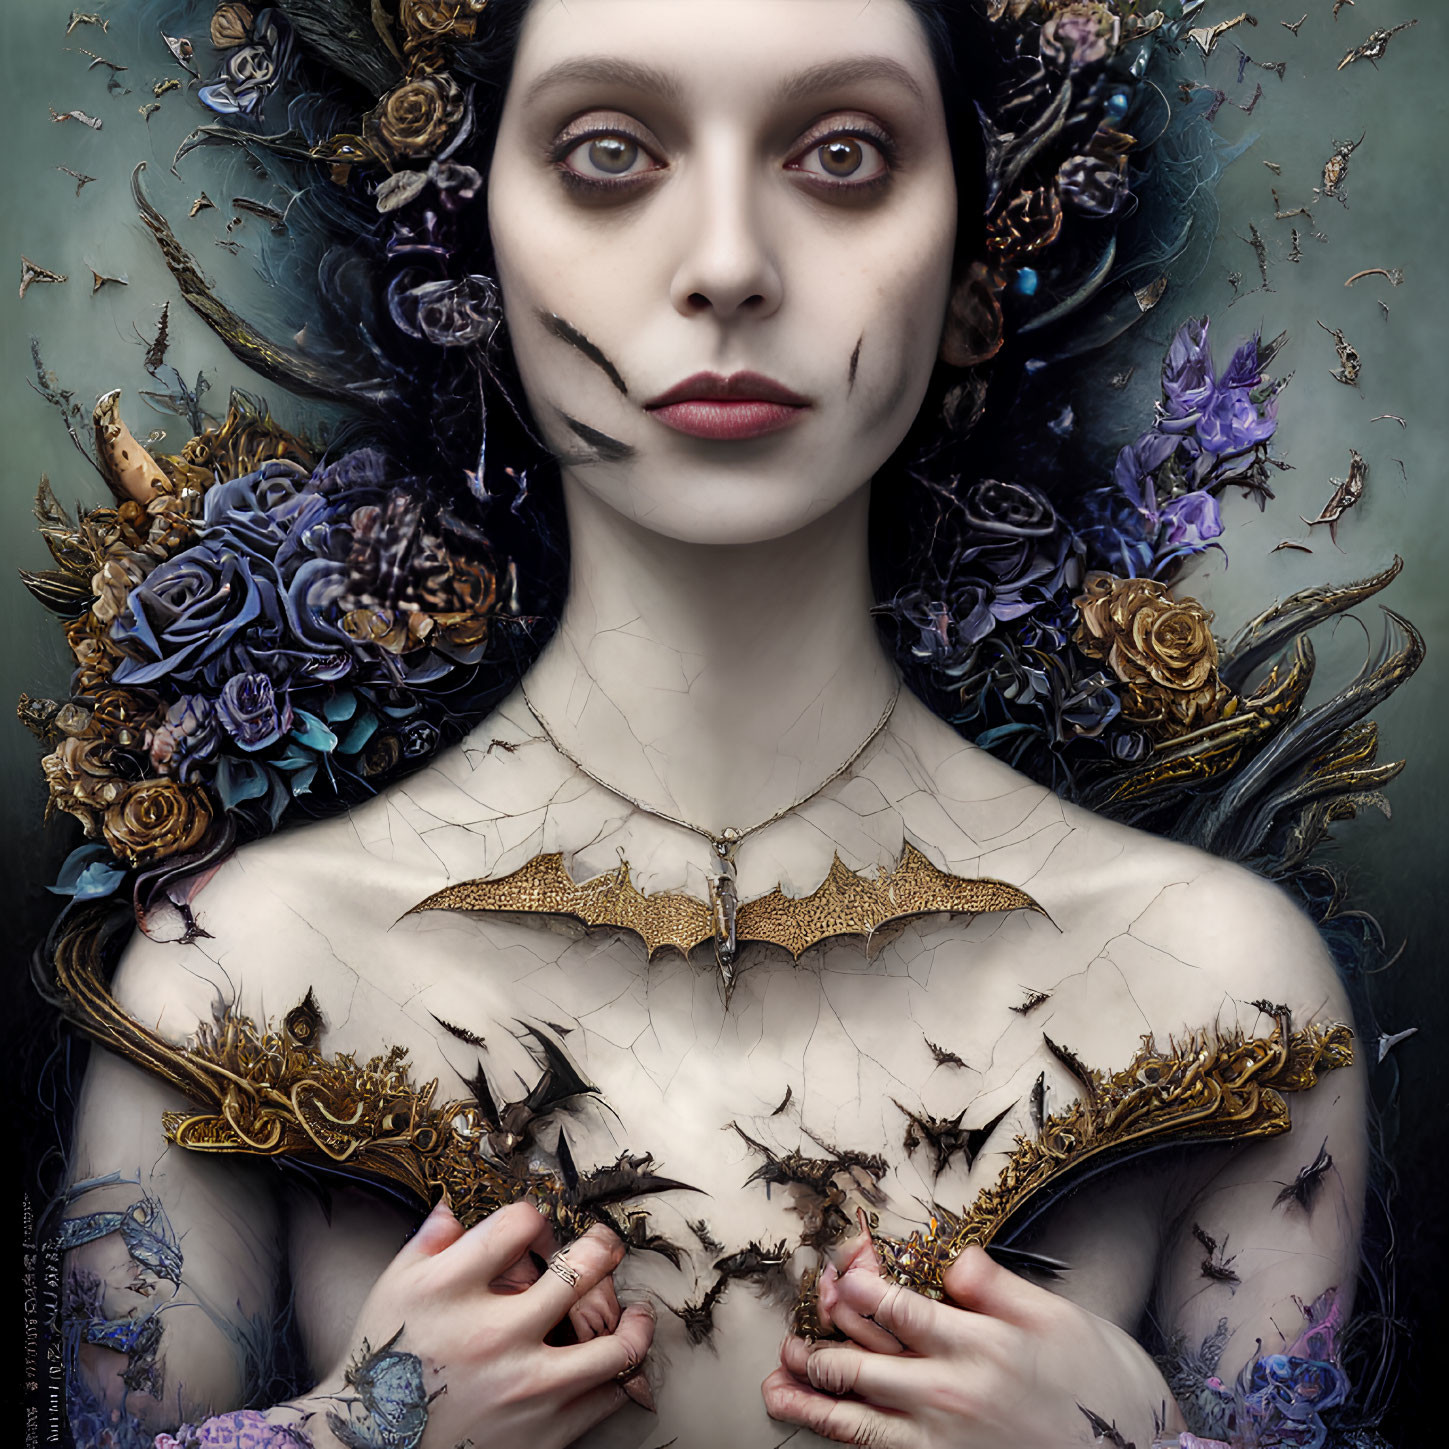 Pale Woman with Dark Eye Makeup Surrounded by Flowers and Butterflies